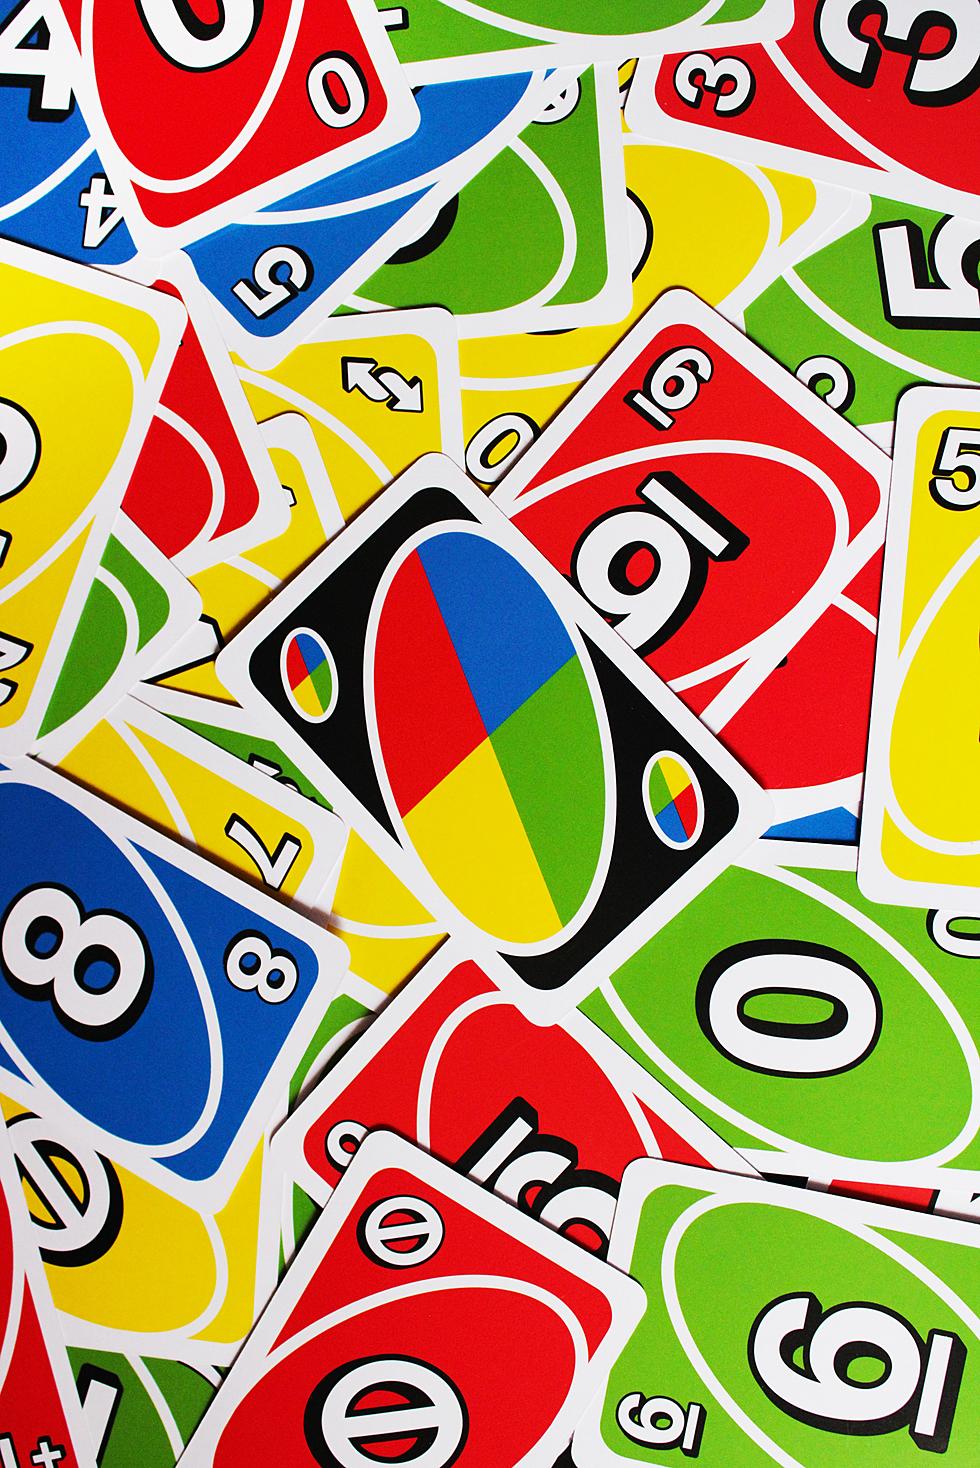 Texas Man Murdered Over a Game of Uno